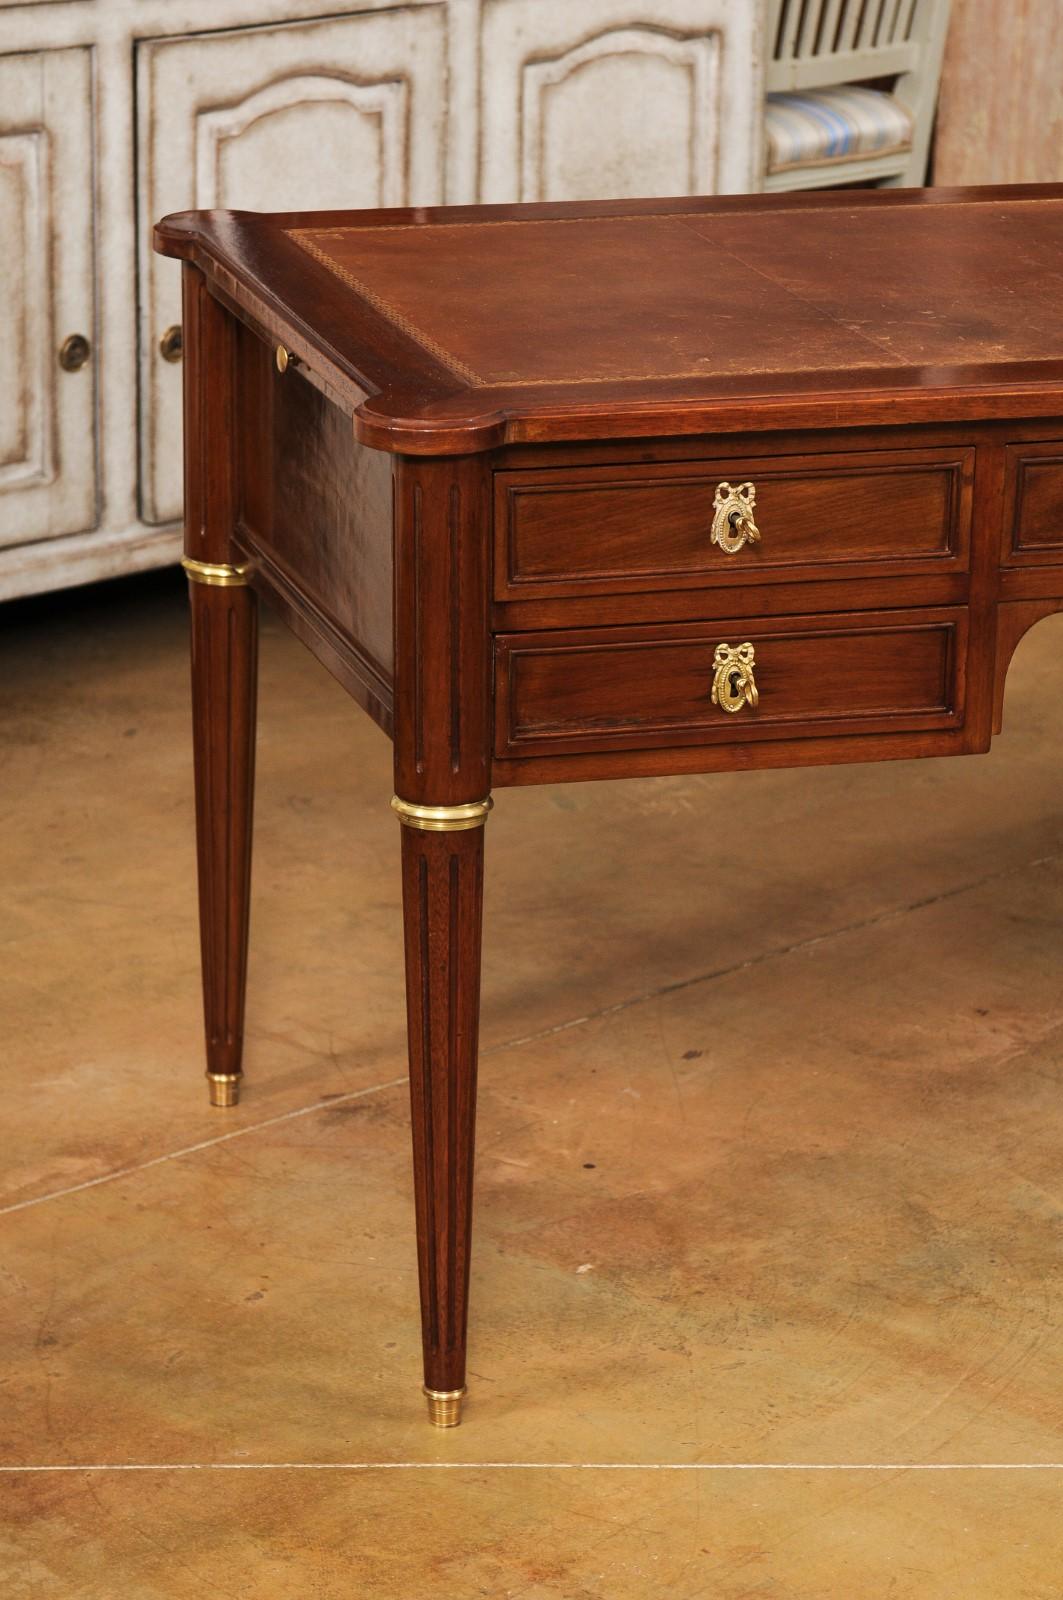 20th Century French Louis XVI Style Mahogany Bureau Plat Desk with Leather Top and Pull-Outs